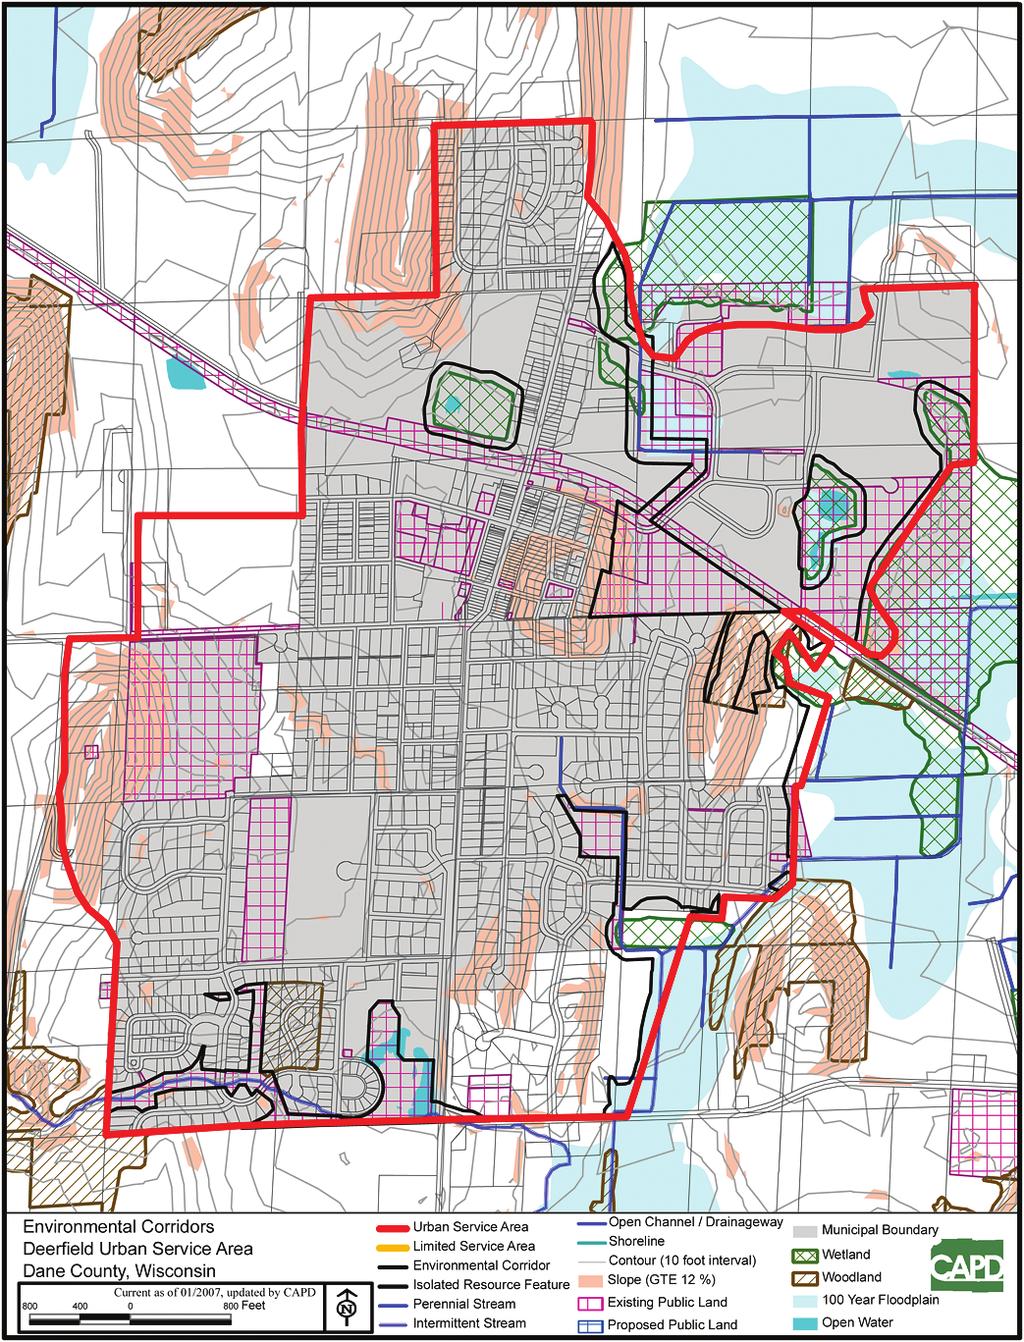 Regional Land Use Planning Framework collection, urban storm drainage systems, streets with curbs and gutters, street lighting, neighborhood facilities such as parks and schools, and urban